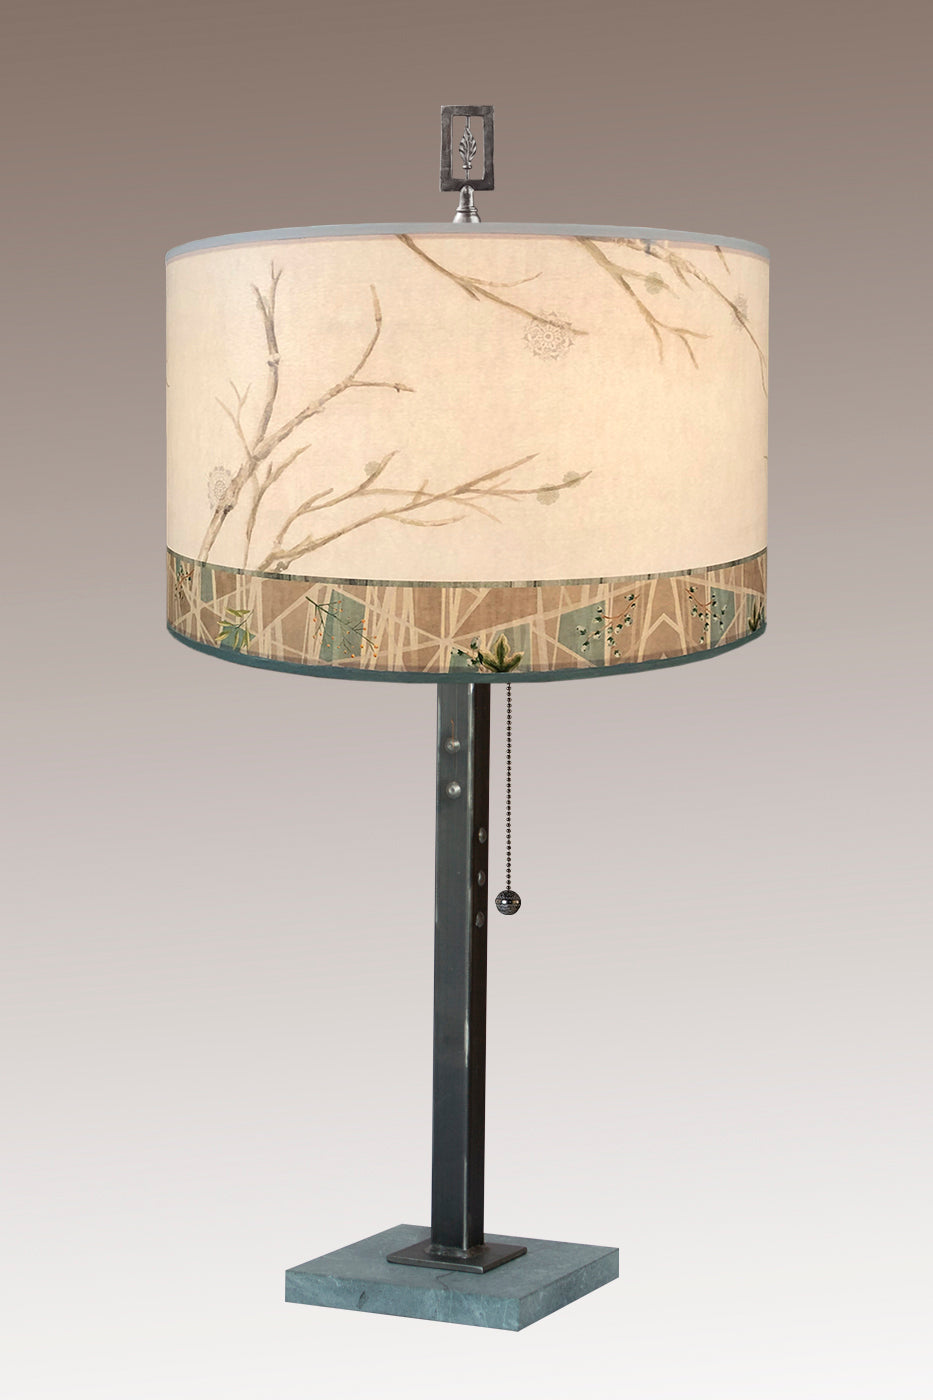 Janna Ugone &amp; Co Table Lamps Steel Table Lamp with Large Drum Shade in Prism Branch